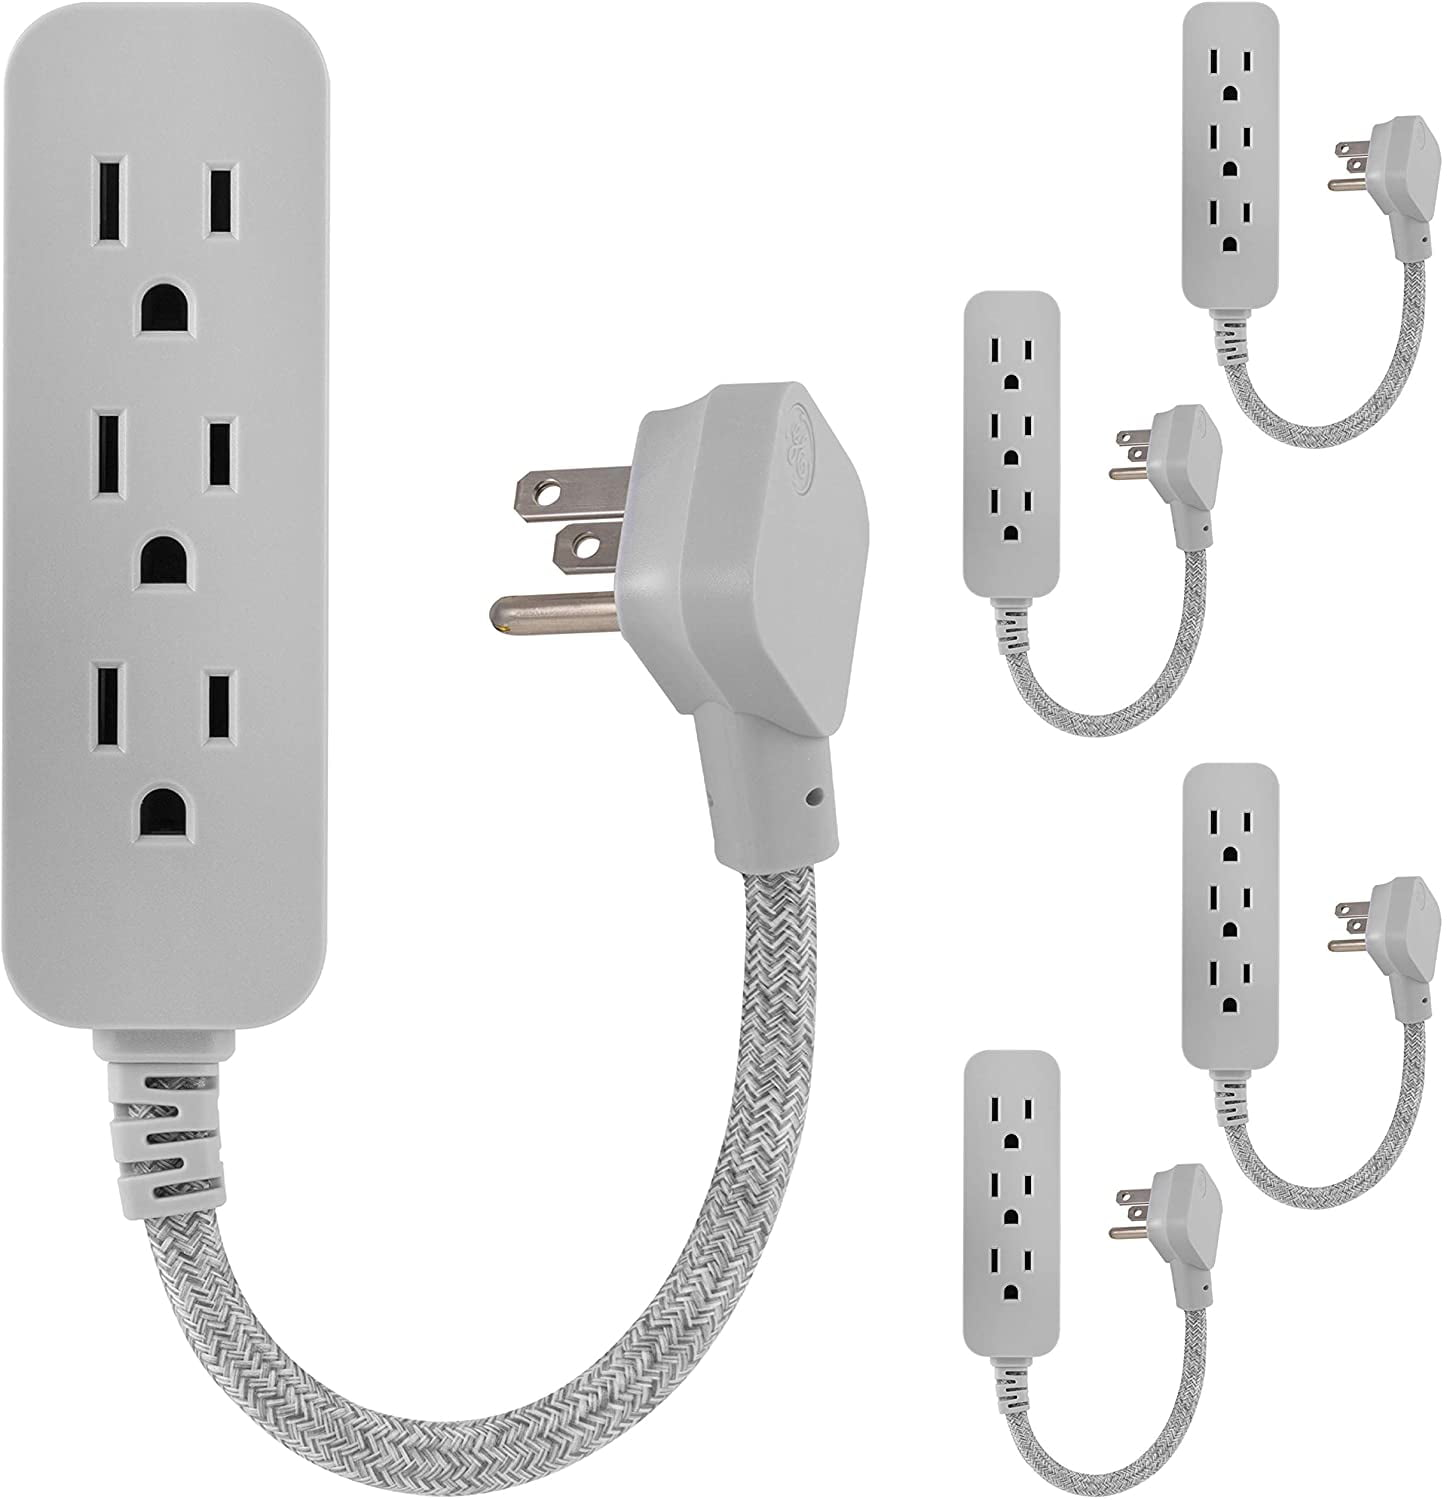 1 to 6 Pcs  Power Strip Grounded Power Extension Cord 3Outlet 1ft 13A/125V/1625W 